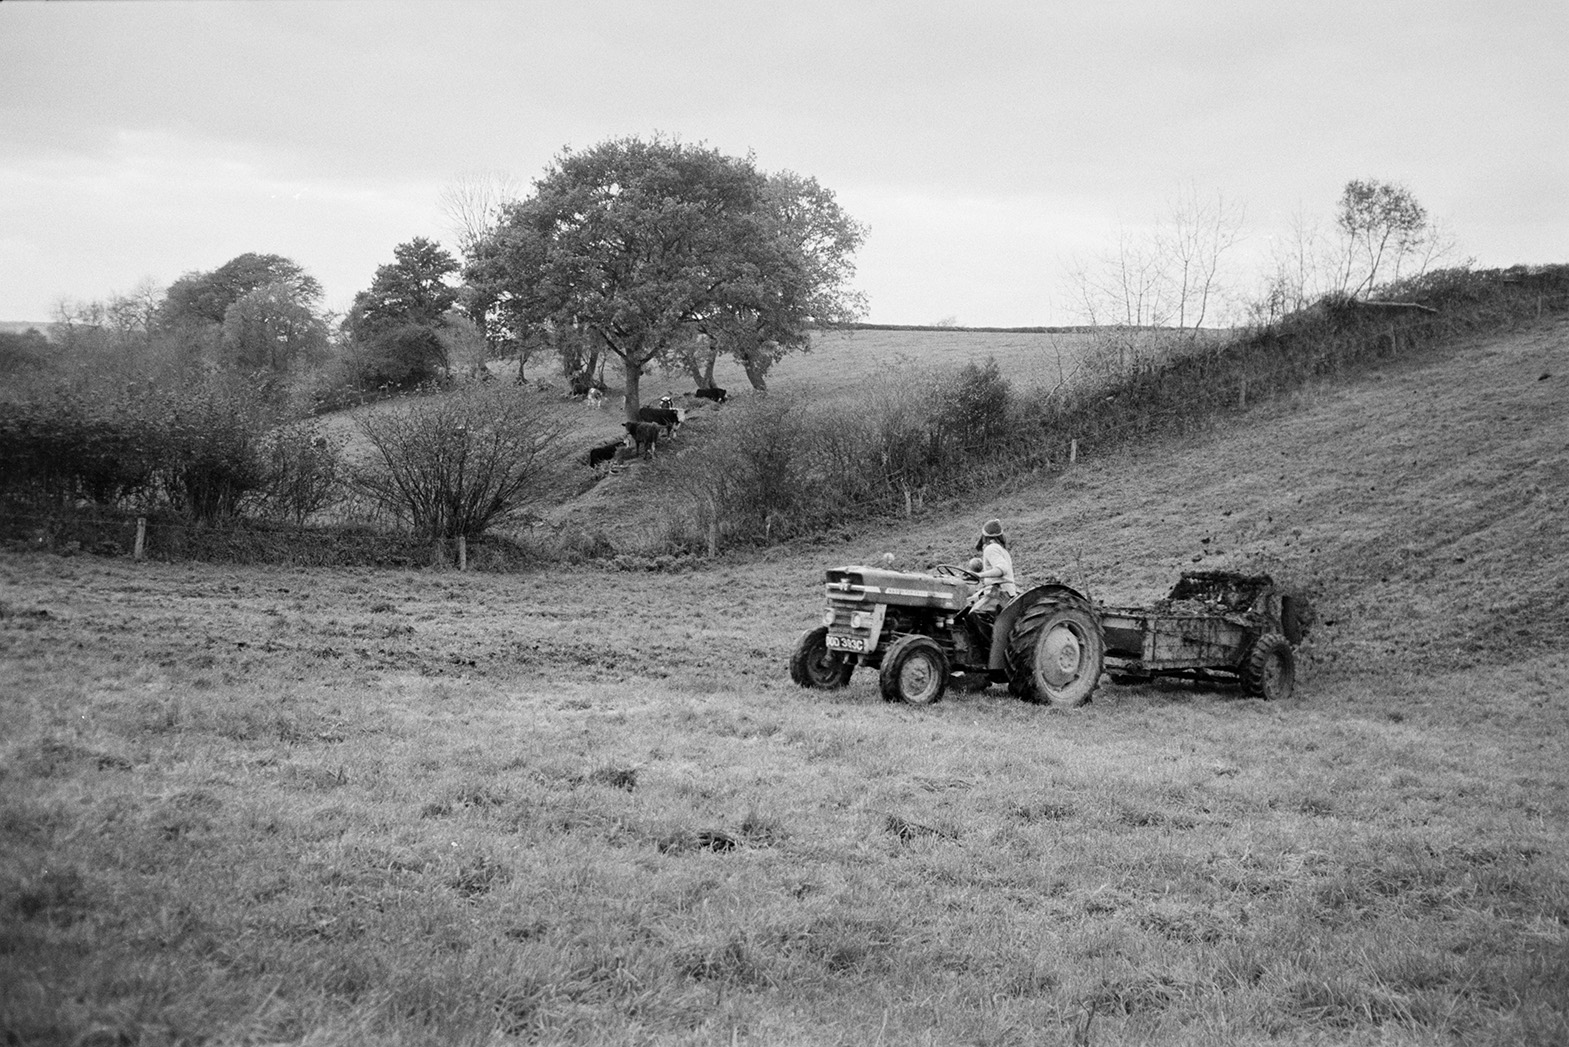 Derek Bright muckspreading in a field at Mill Road Farm, Beaford. Cattle and trees can be seen in the adjacent field. The farm was also known as Jeffrys.